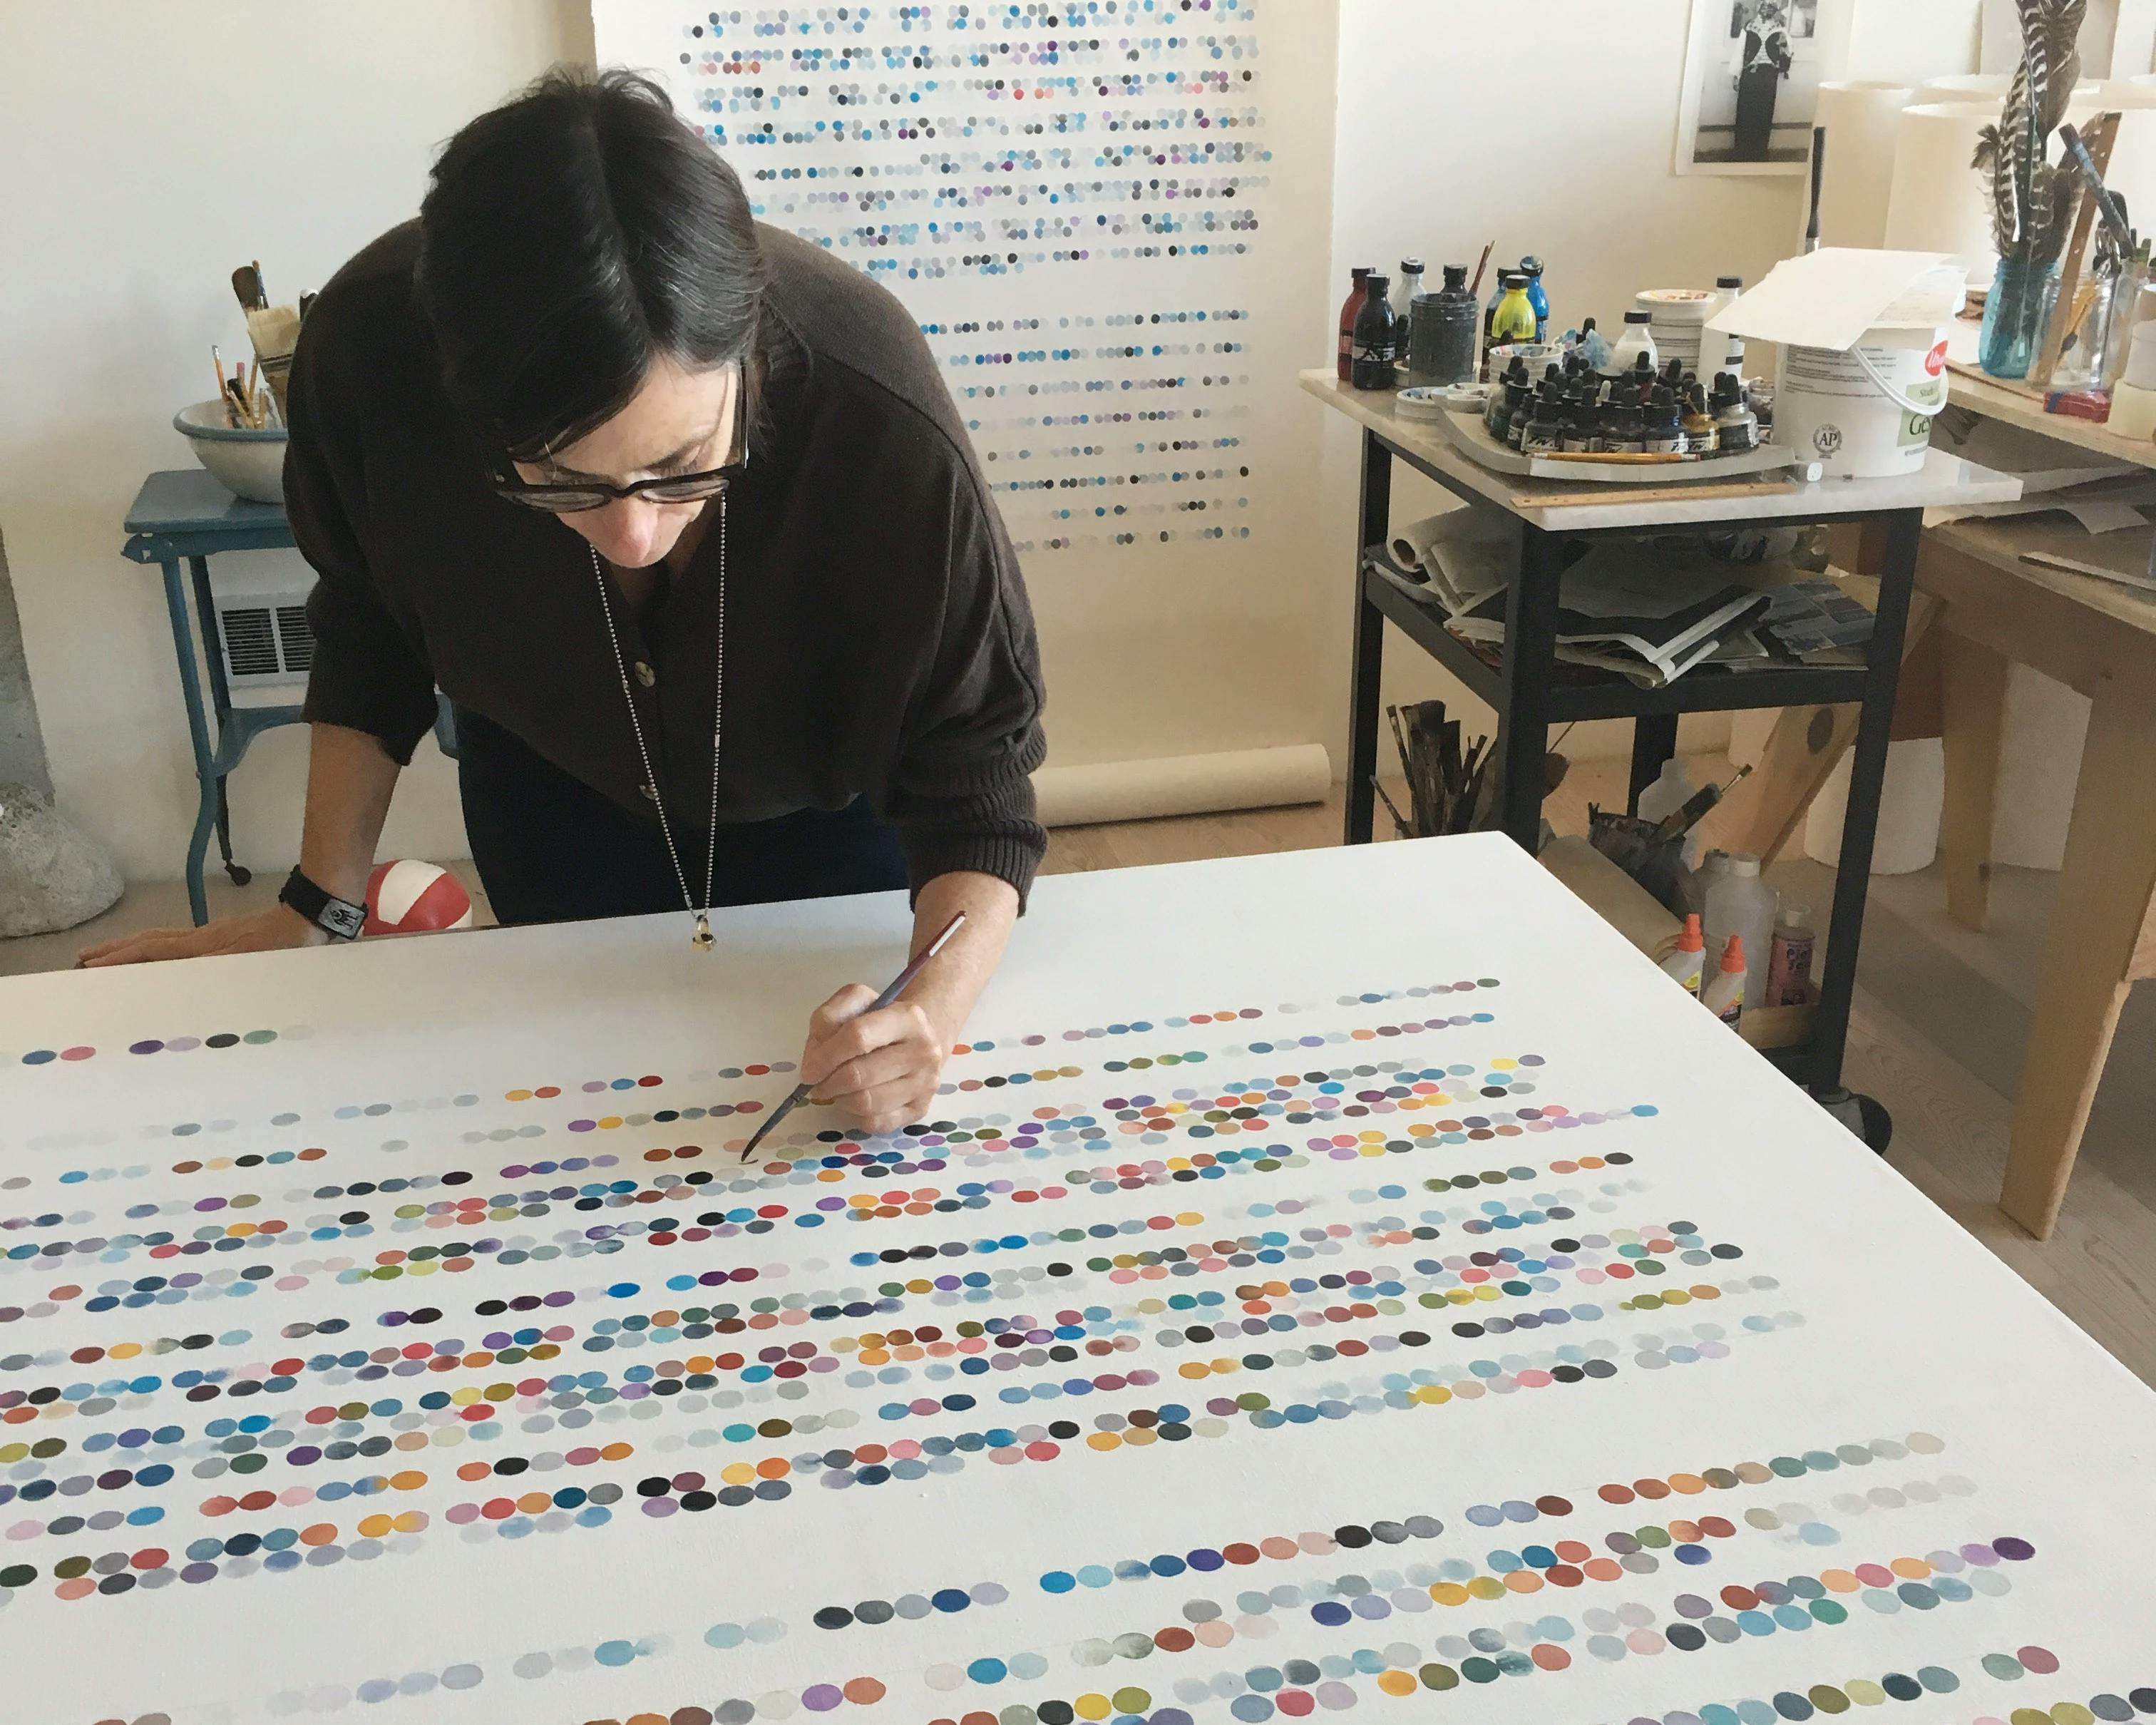 Artist Gail Tarantino working on a large, text-based work with concentric circles in her studio.